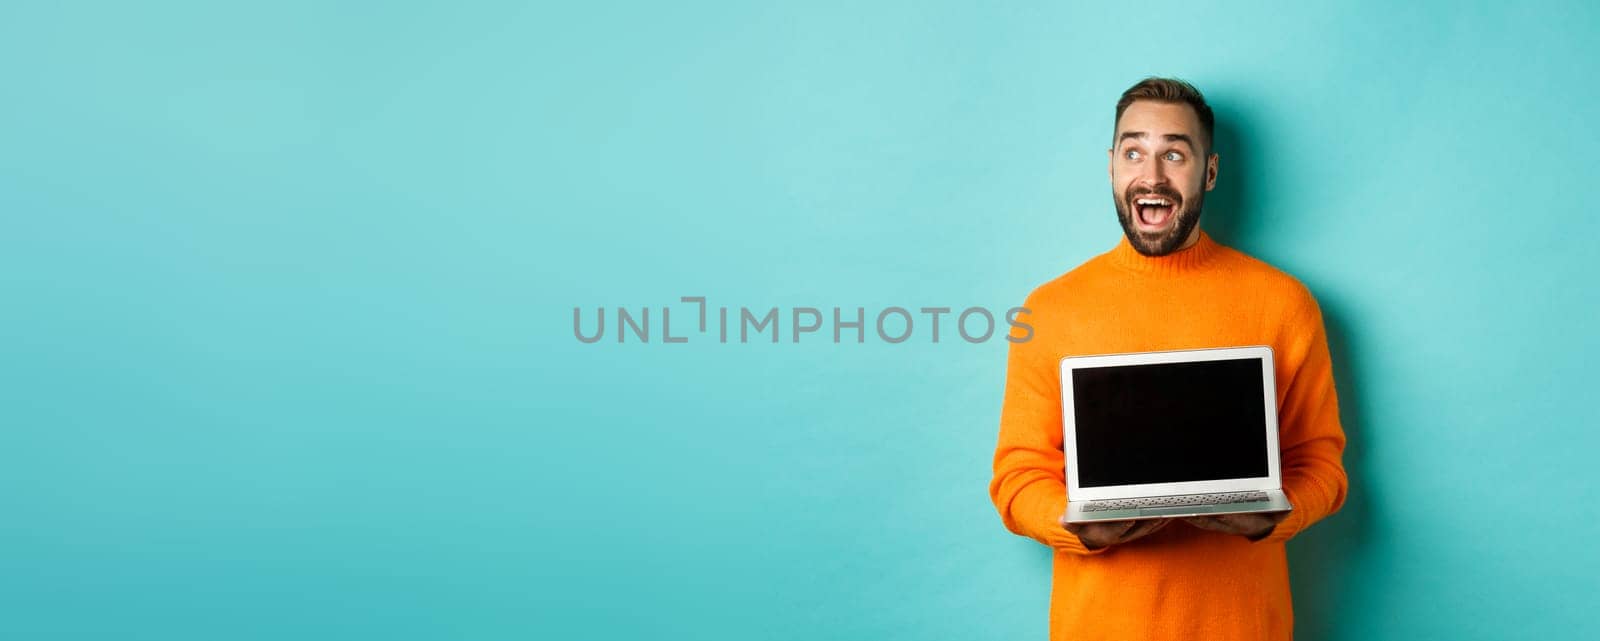 Amazed young man in orange sweater looking at upper left corner, showing laptop screen promo offer, standing over turquoise background.